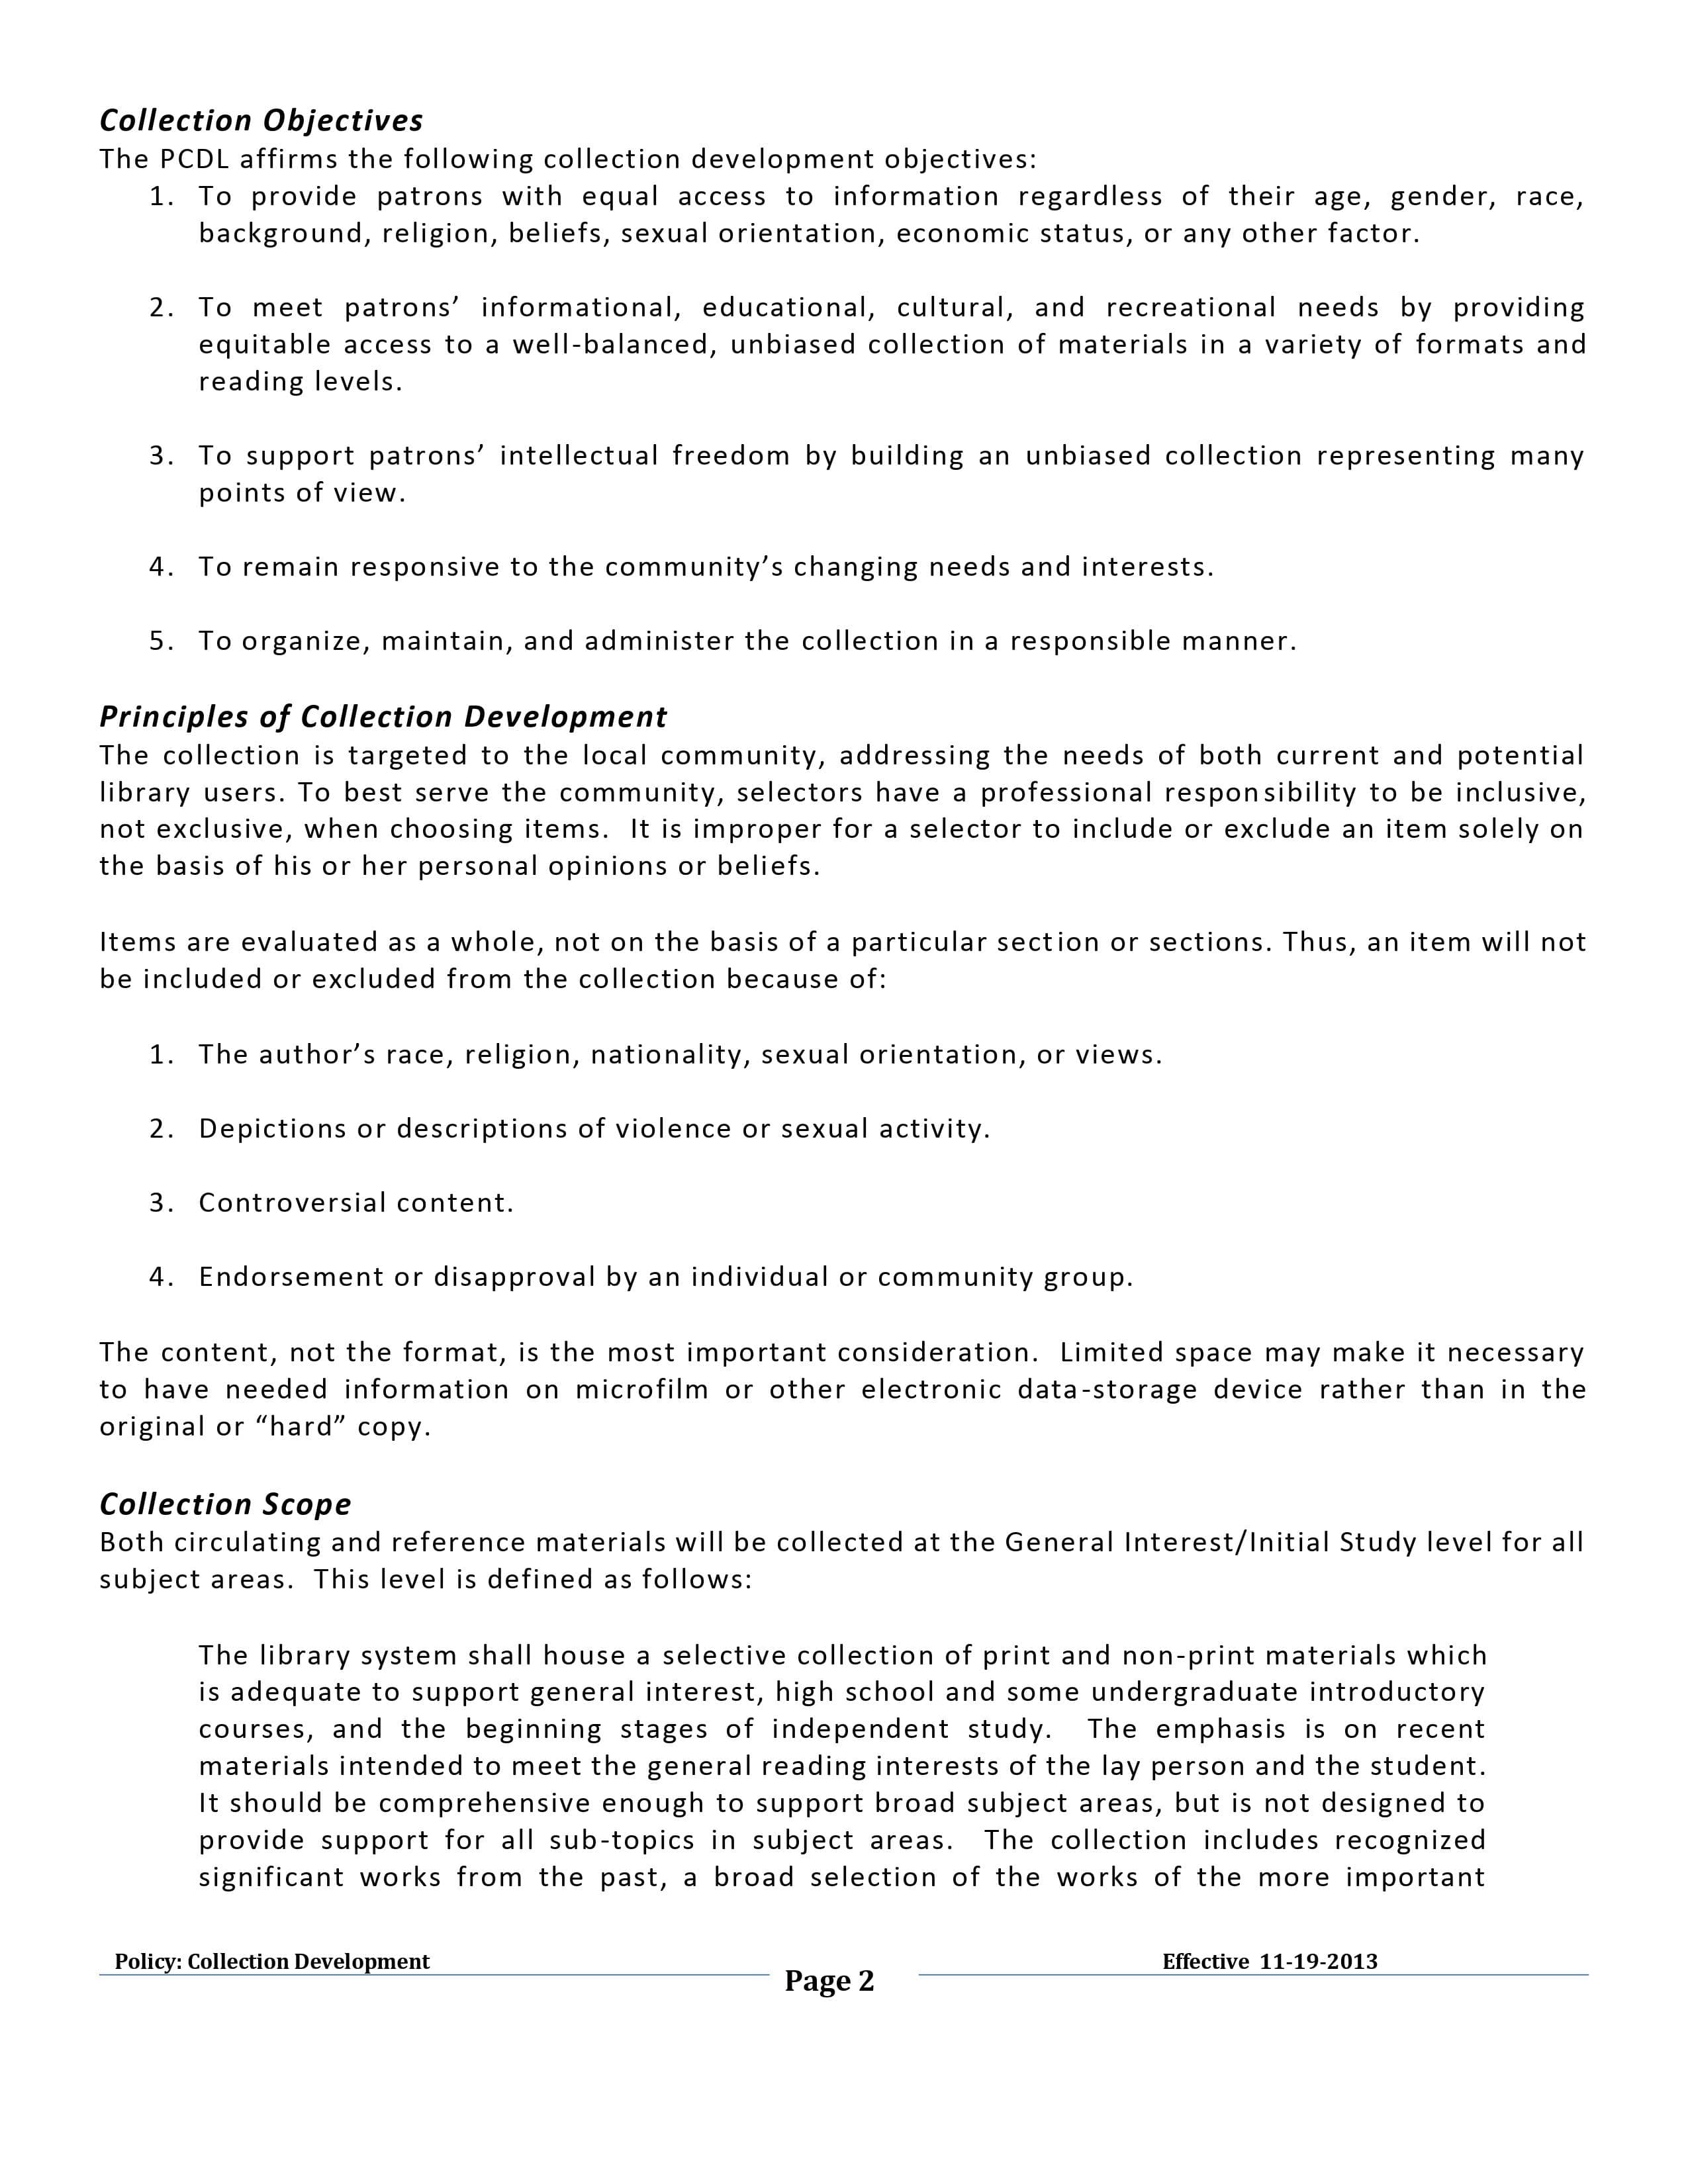 PCDL Collection Development Policy Page 2